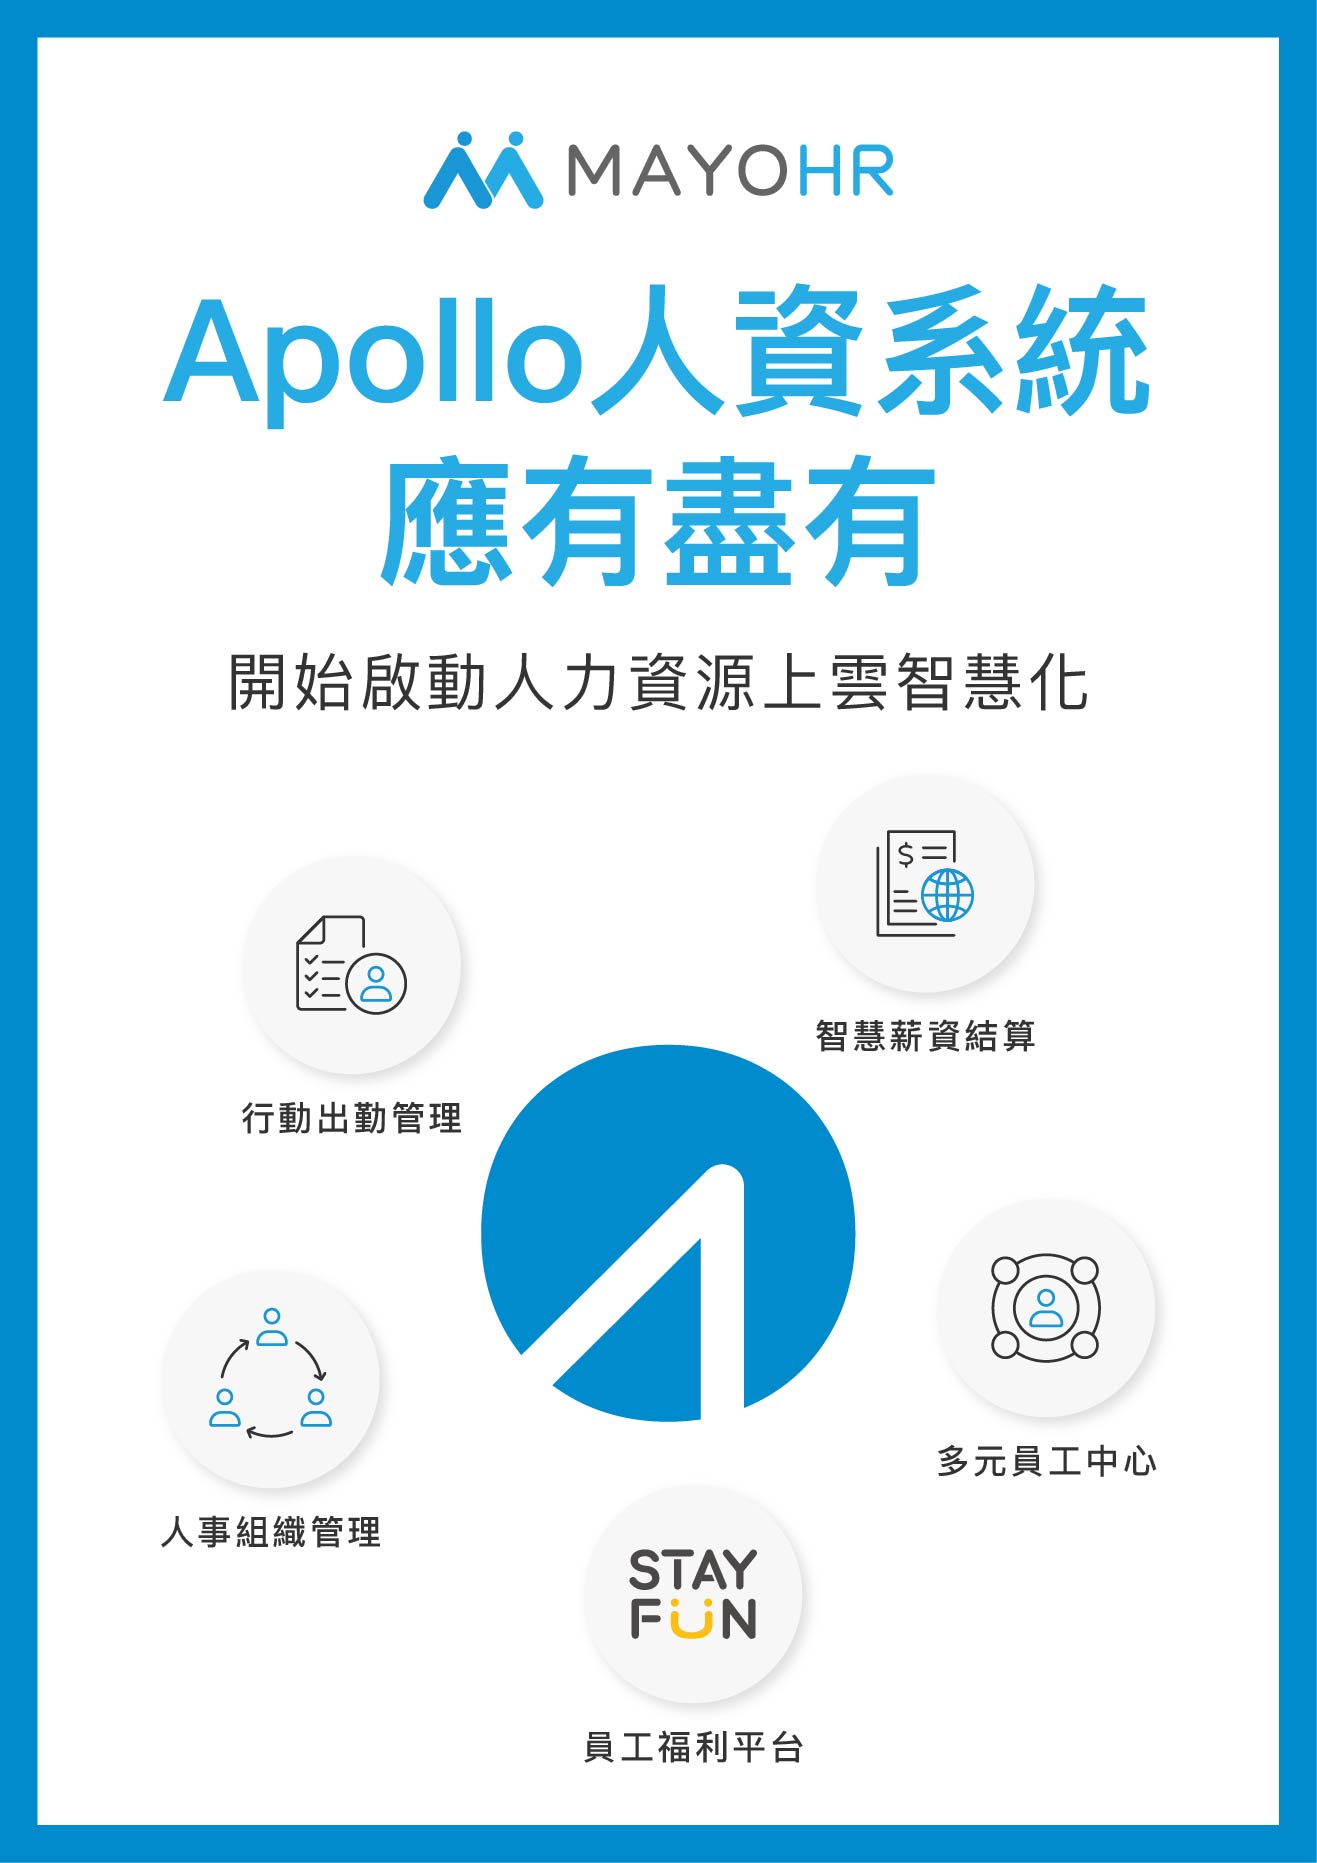 How can the Apollo's five modules easily reduce 80-90% of administrative and welfare-related tasks?